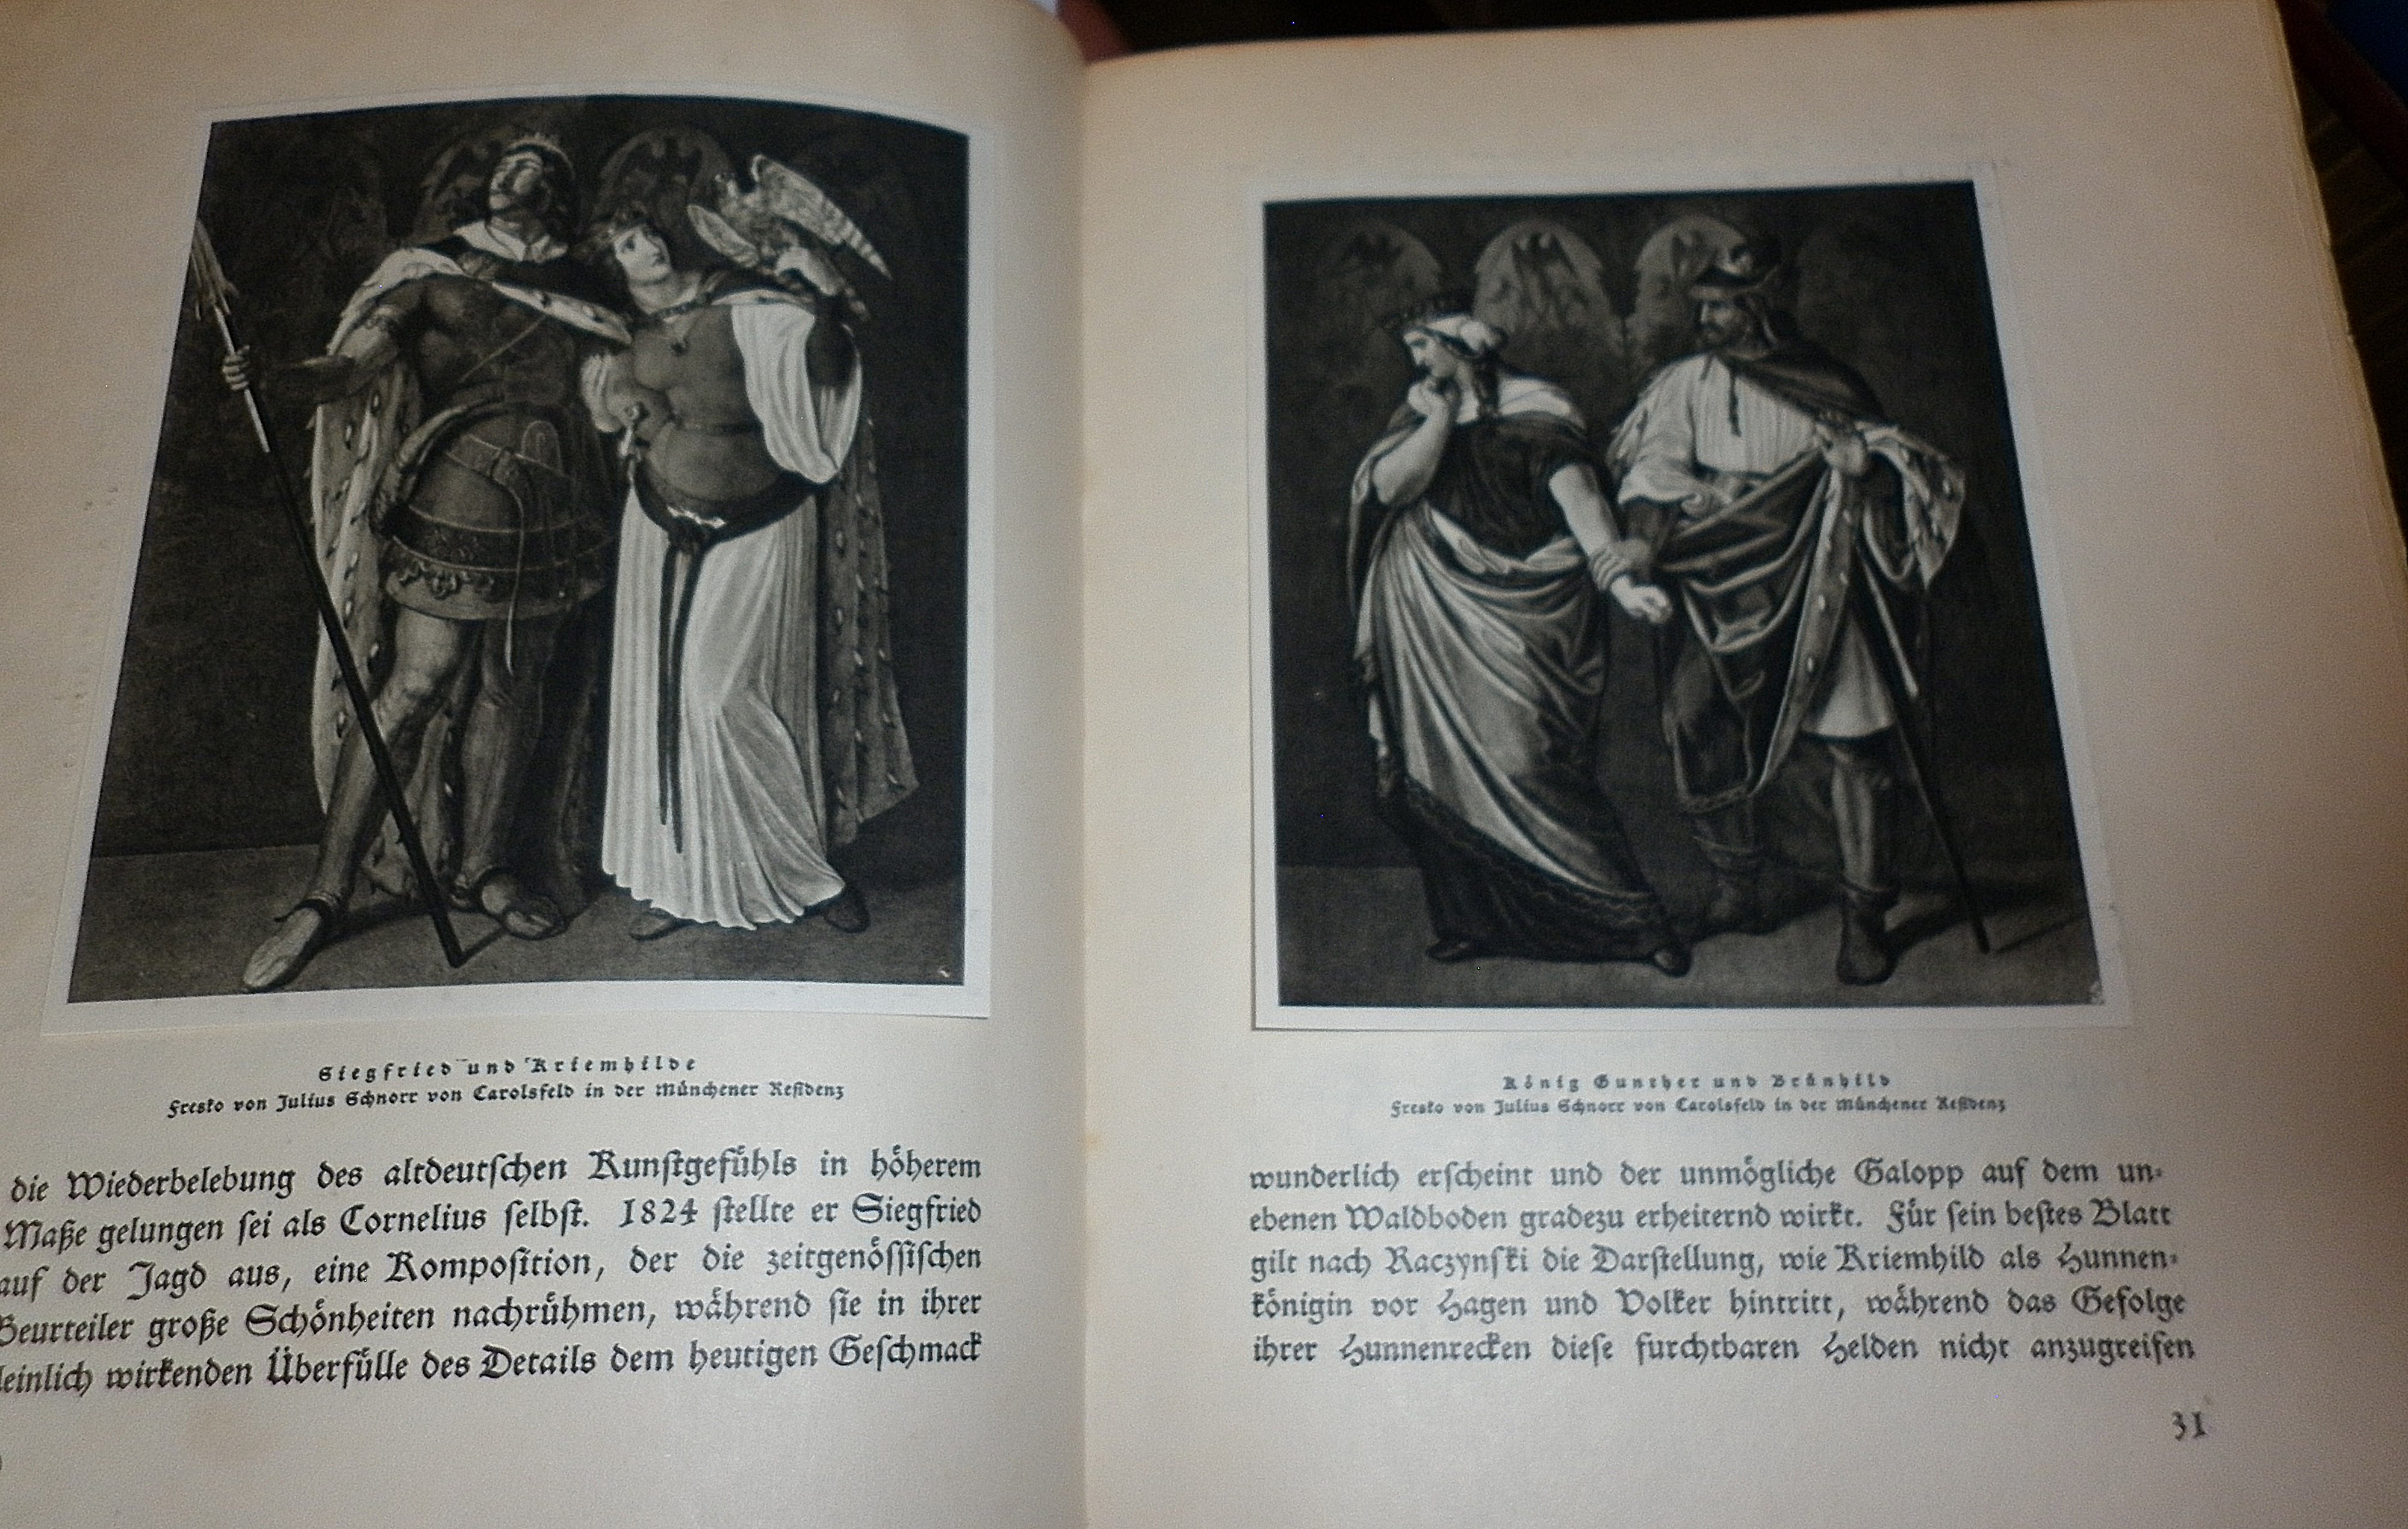 Das Nibelungen lied 1923 illustrated edition - Image 3 of 3